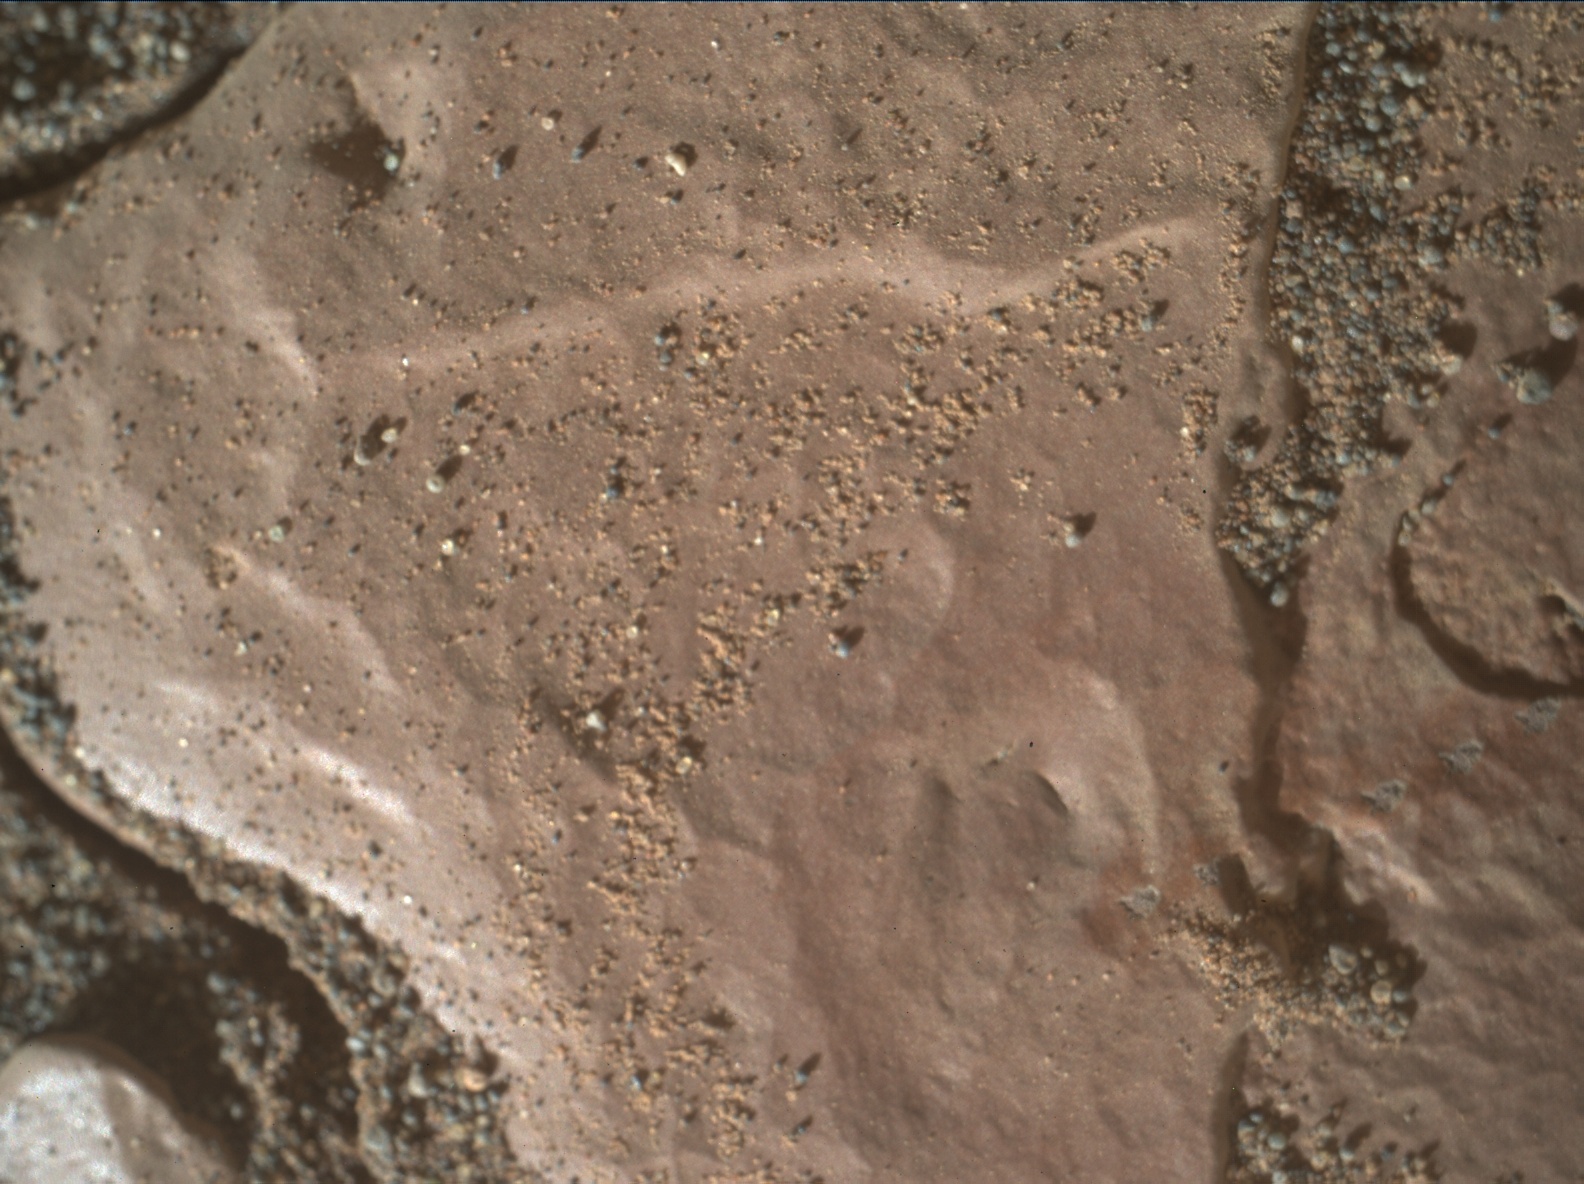 Nasa's Mars rover Curiosity acquired this image using its Mars Hand Lens Imager (MAHLI) on Sol 2419